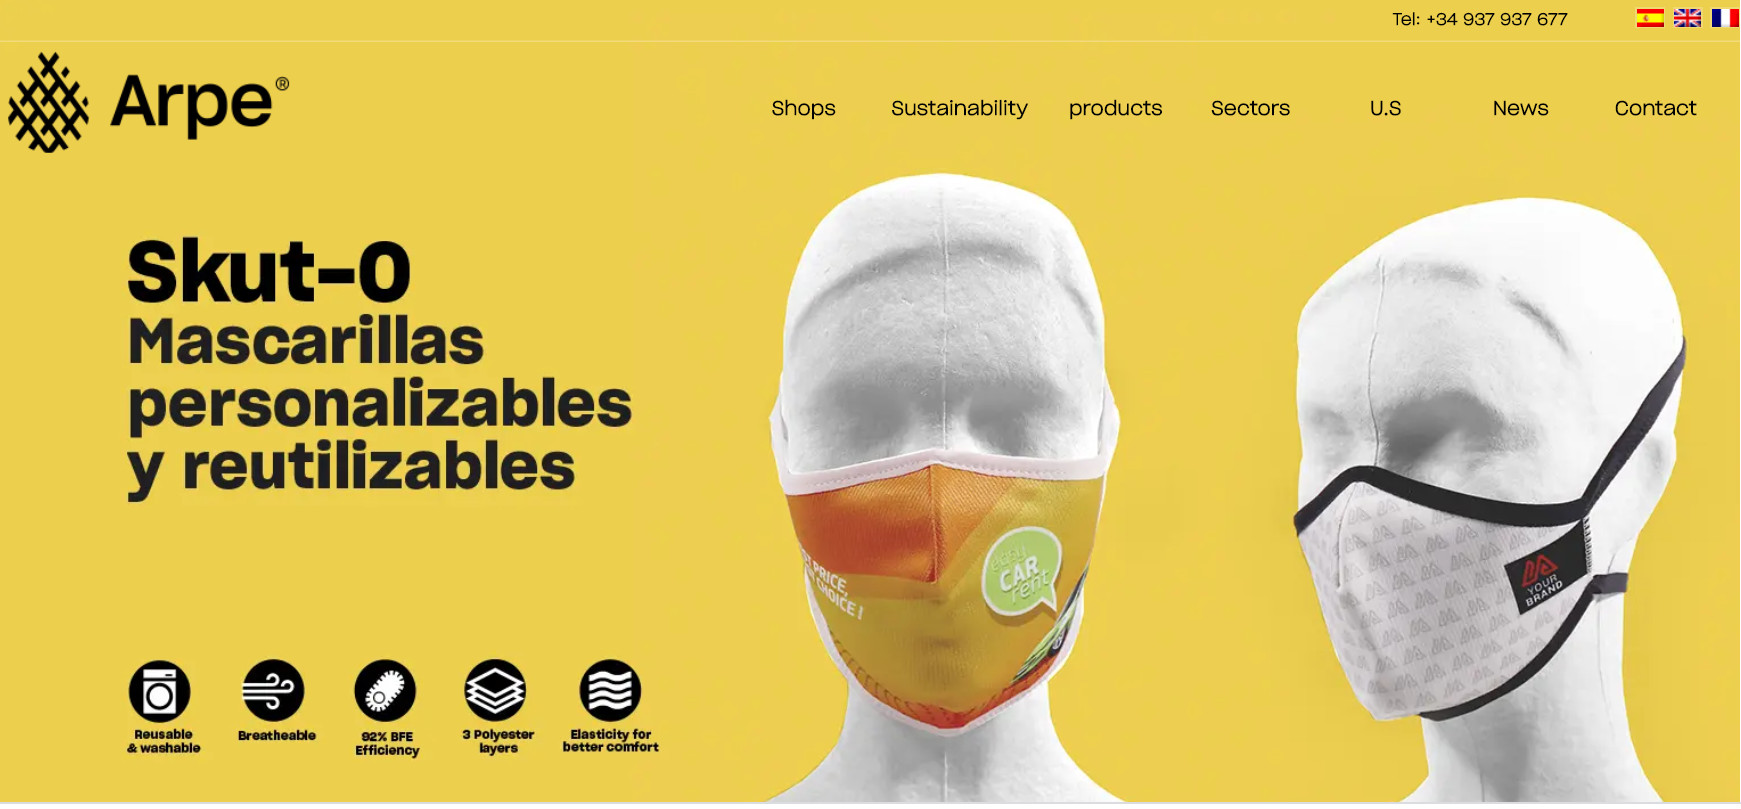 Polytechnnic University of Catalonia (UPC) selects ARPE' face masks for its staff and students